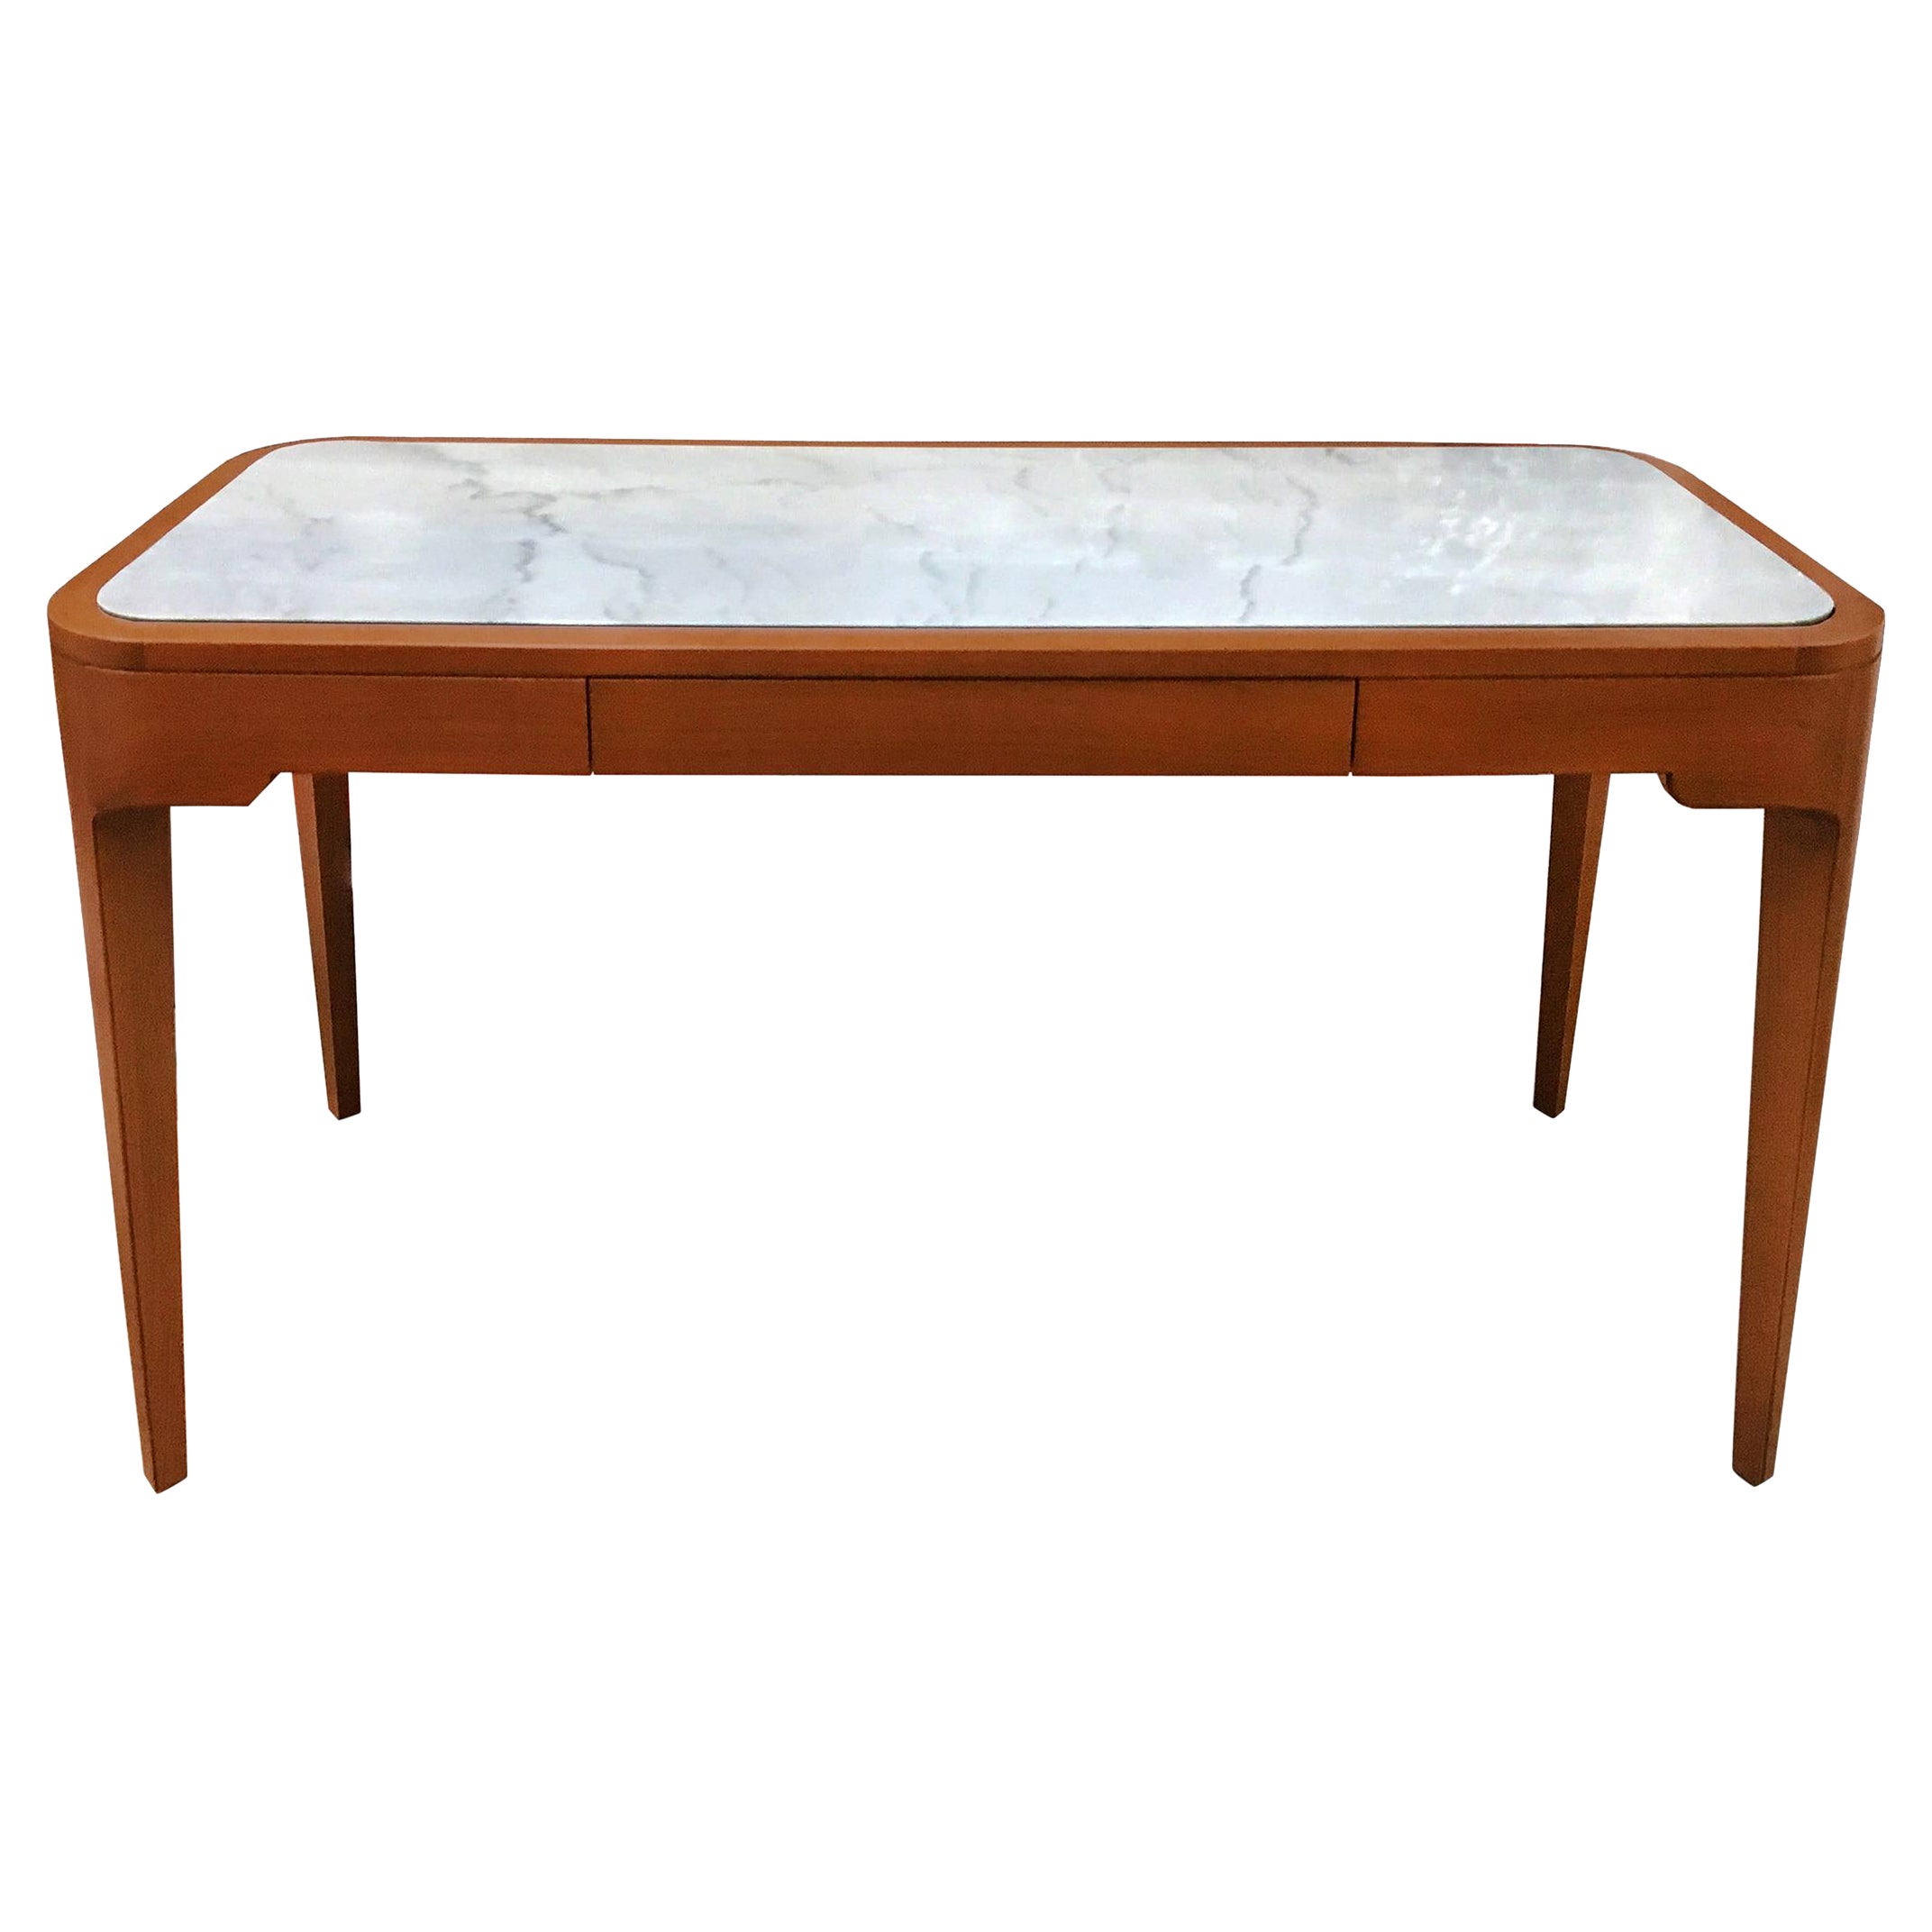 Eileen Writing Desk in Walnut with Palissandro Stone Inset by Chapter & Verse